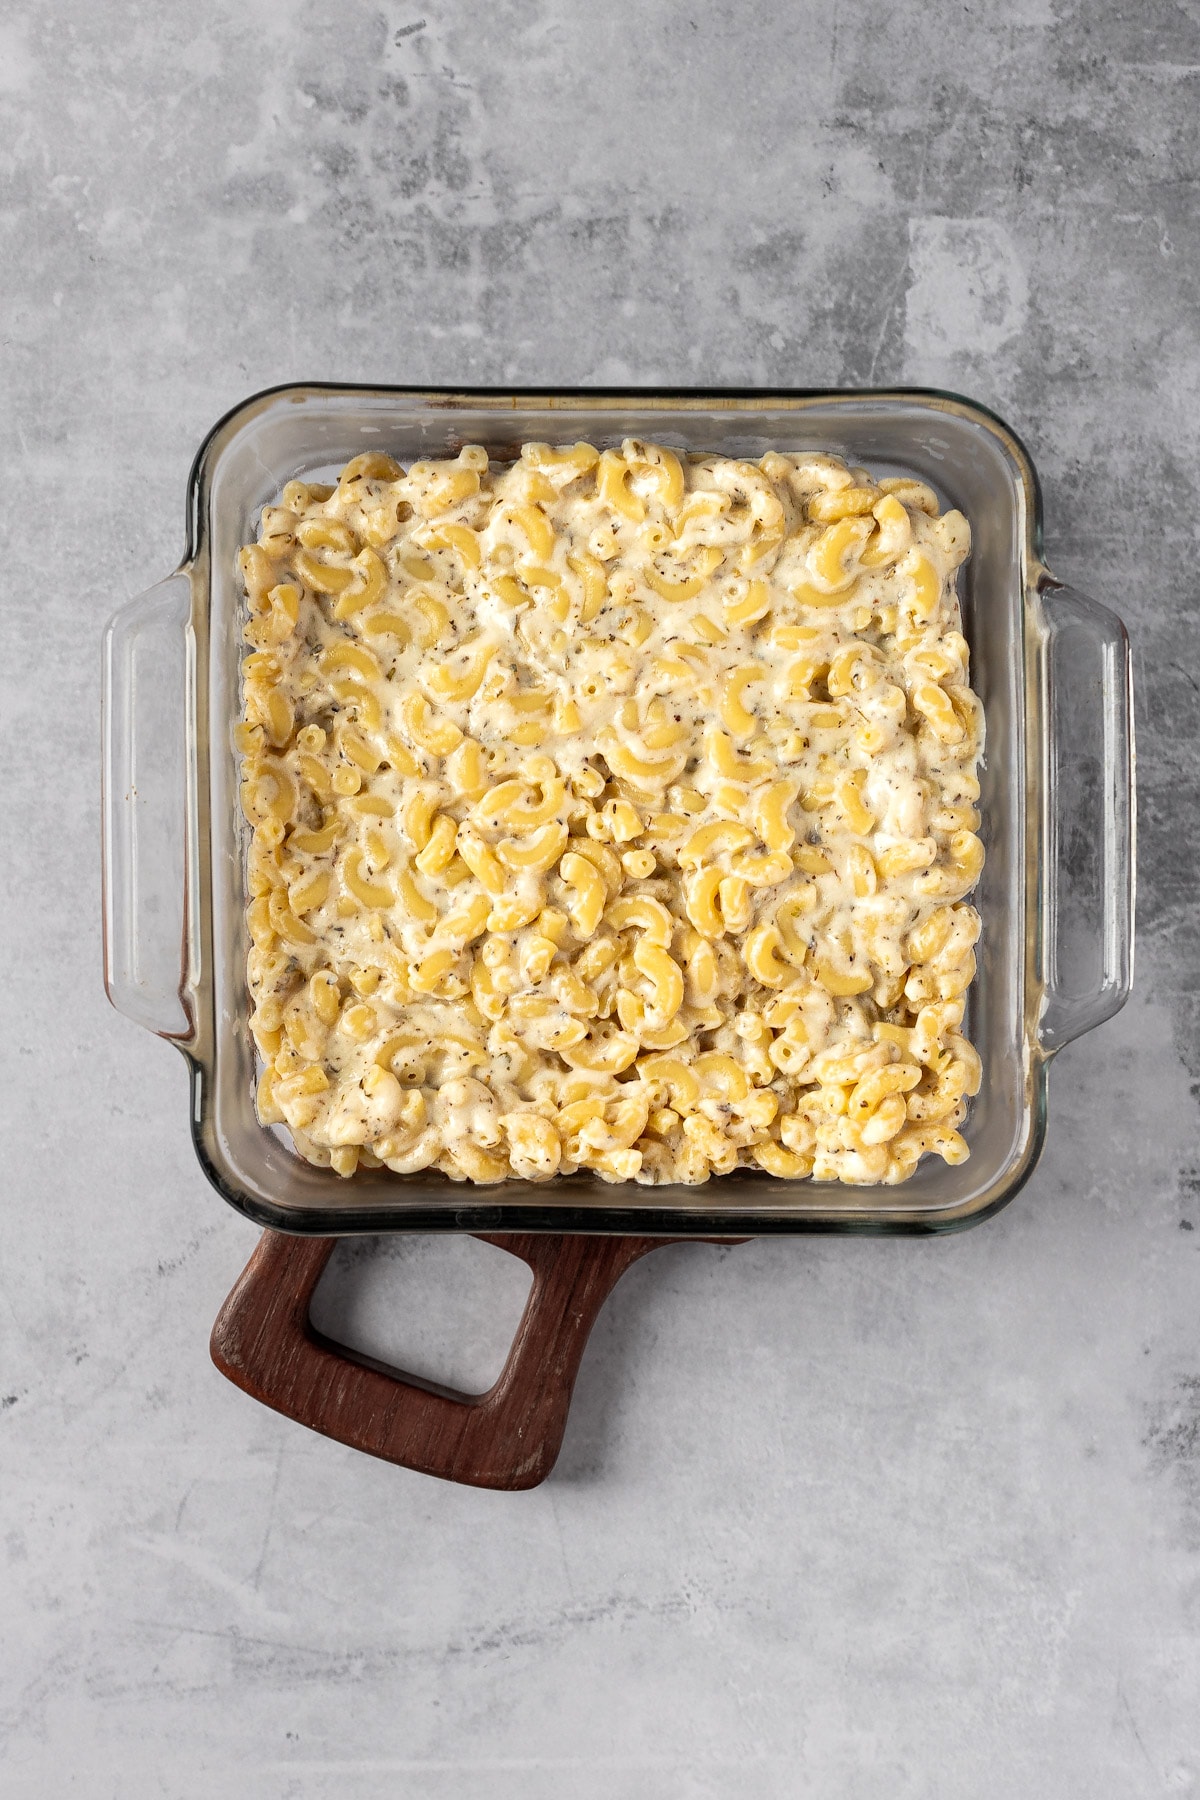 Cooked macaroni pasta that has been coated in the goat cheese sauce, in a square glass baking dish.